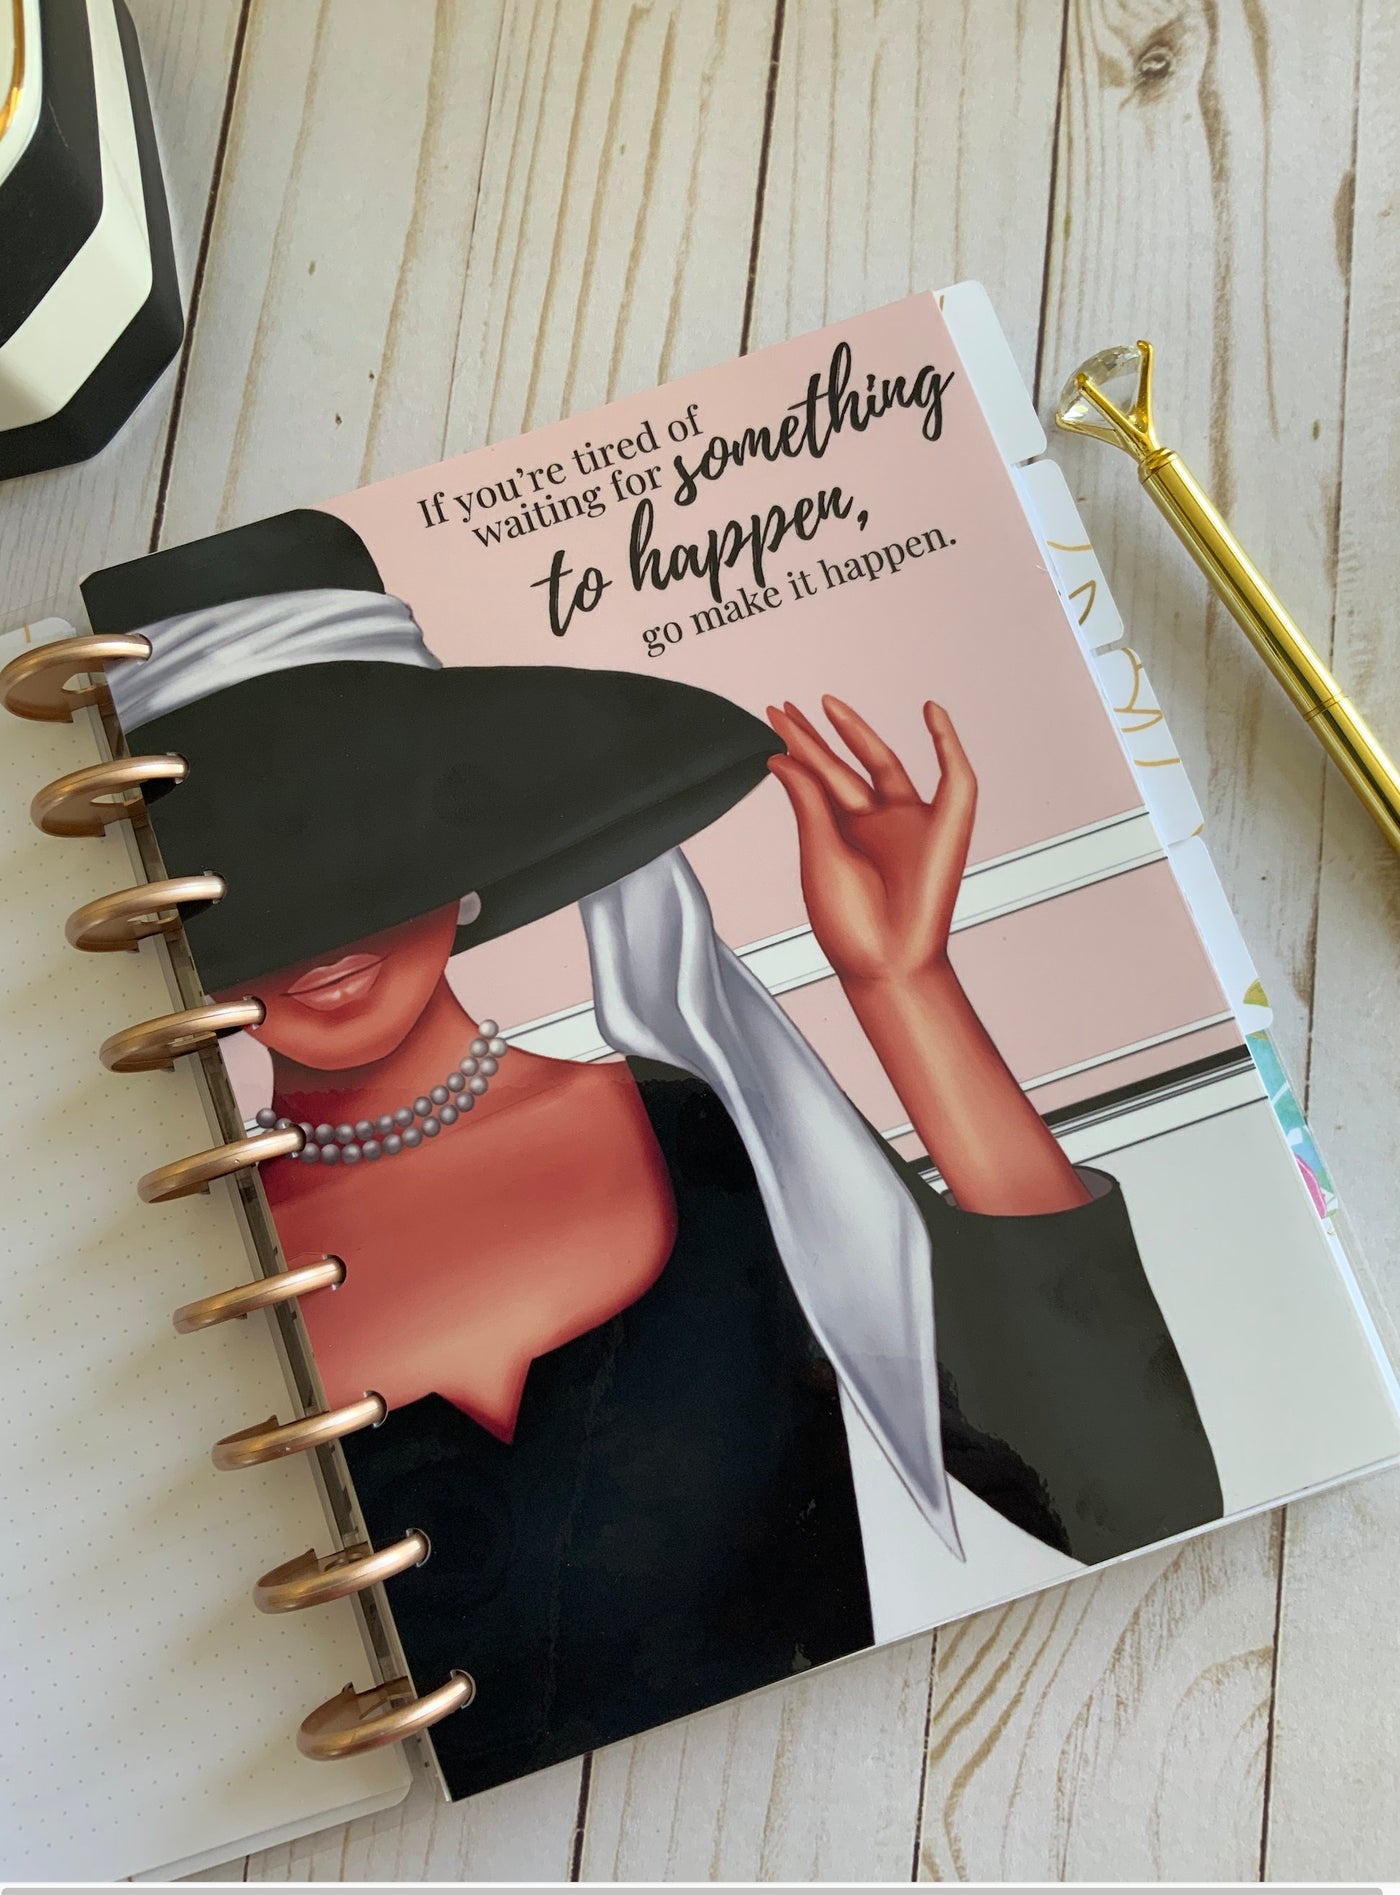 DIY PLANNER Supplies! FREE stickers, Cover, Dividers, Dashbobard